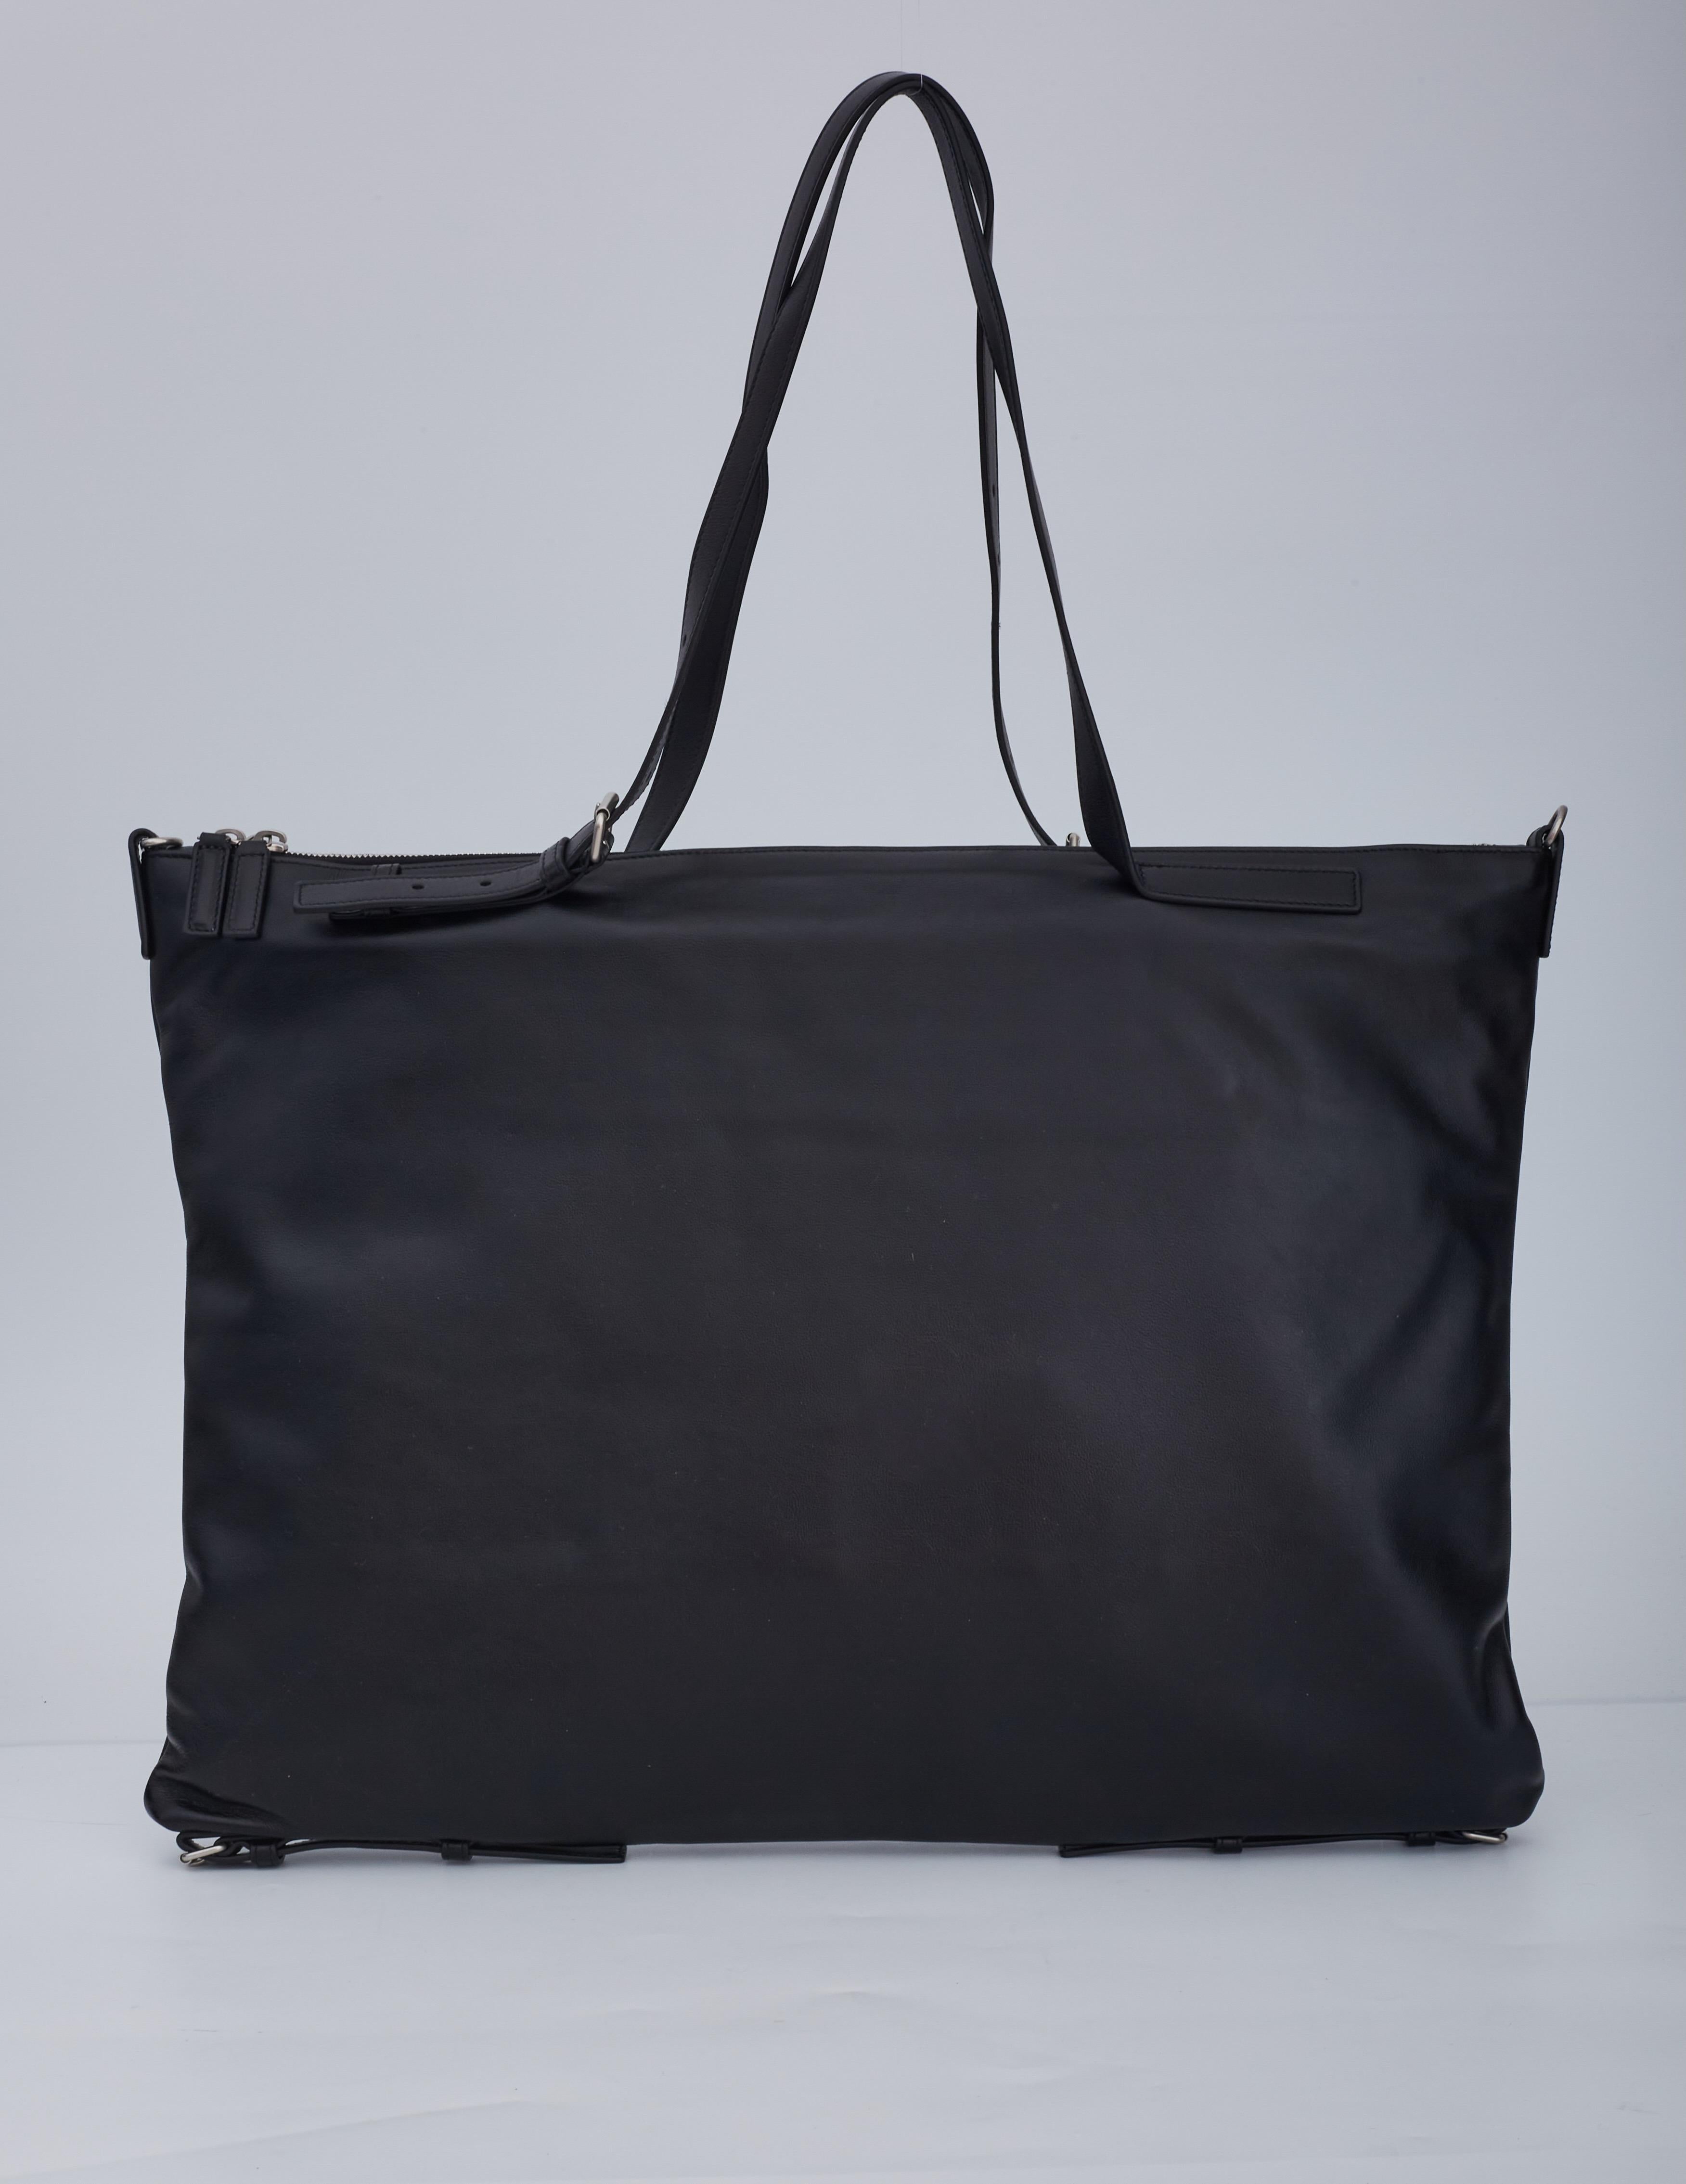 COLOR: Black
MATERIAL: Leather
ITEM CODE: 565740
MEASURES: H 15” x L 20.5” x D 1”
DROP: 11”
COMES WITH: Dust bag
CONDITION: New

Made in Italy